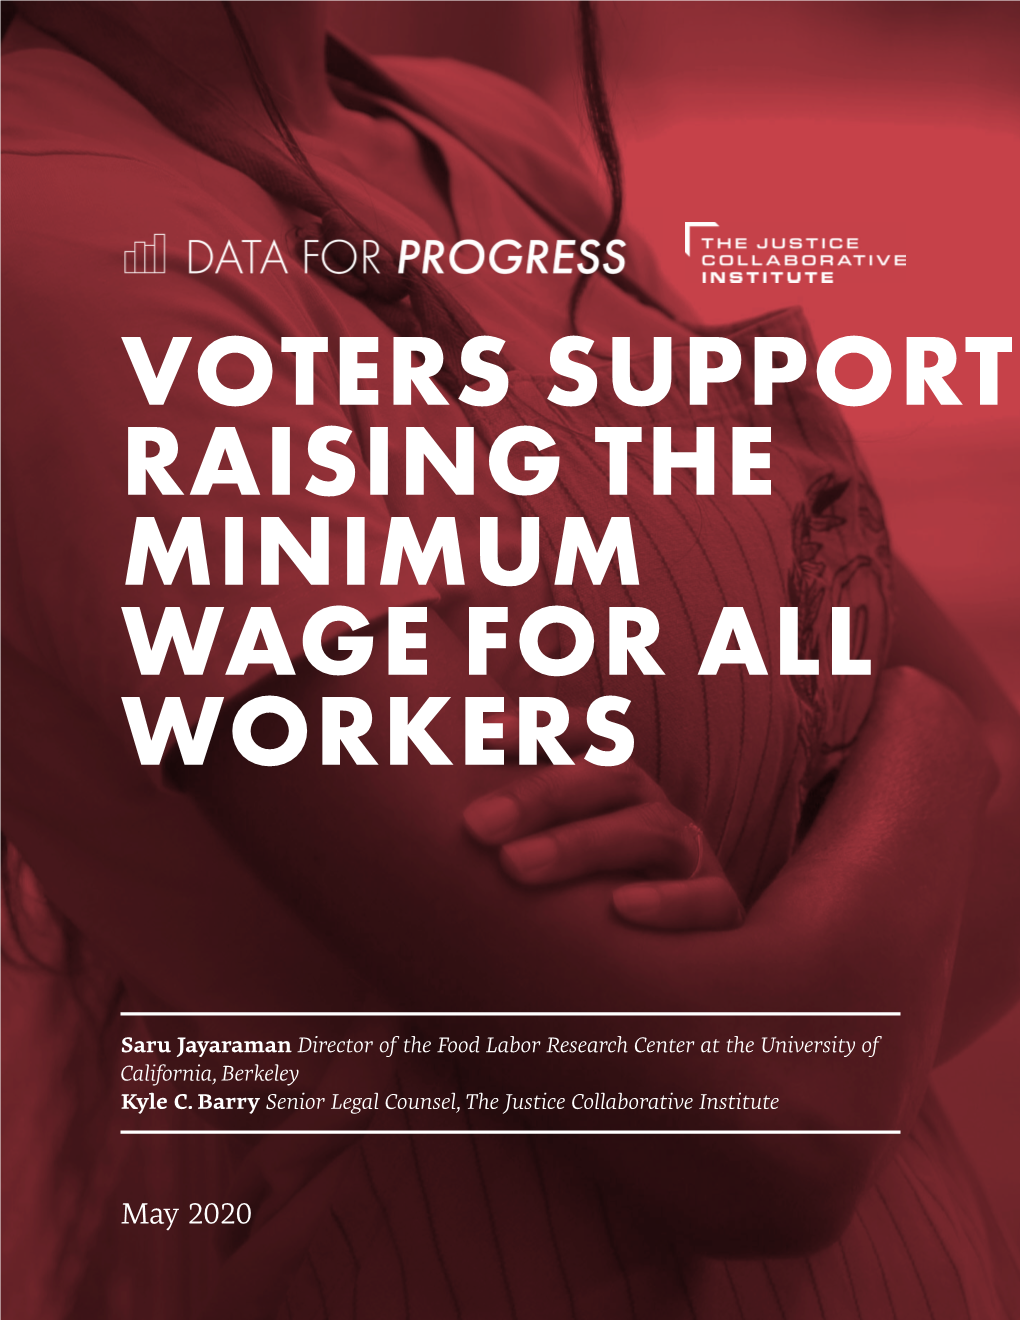 Voters Support Raising the Minimum Wage for All Workers